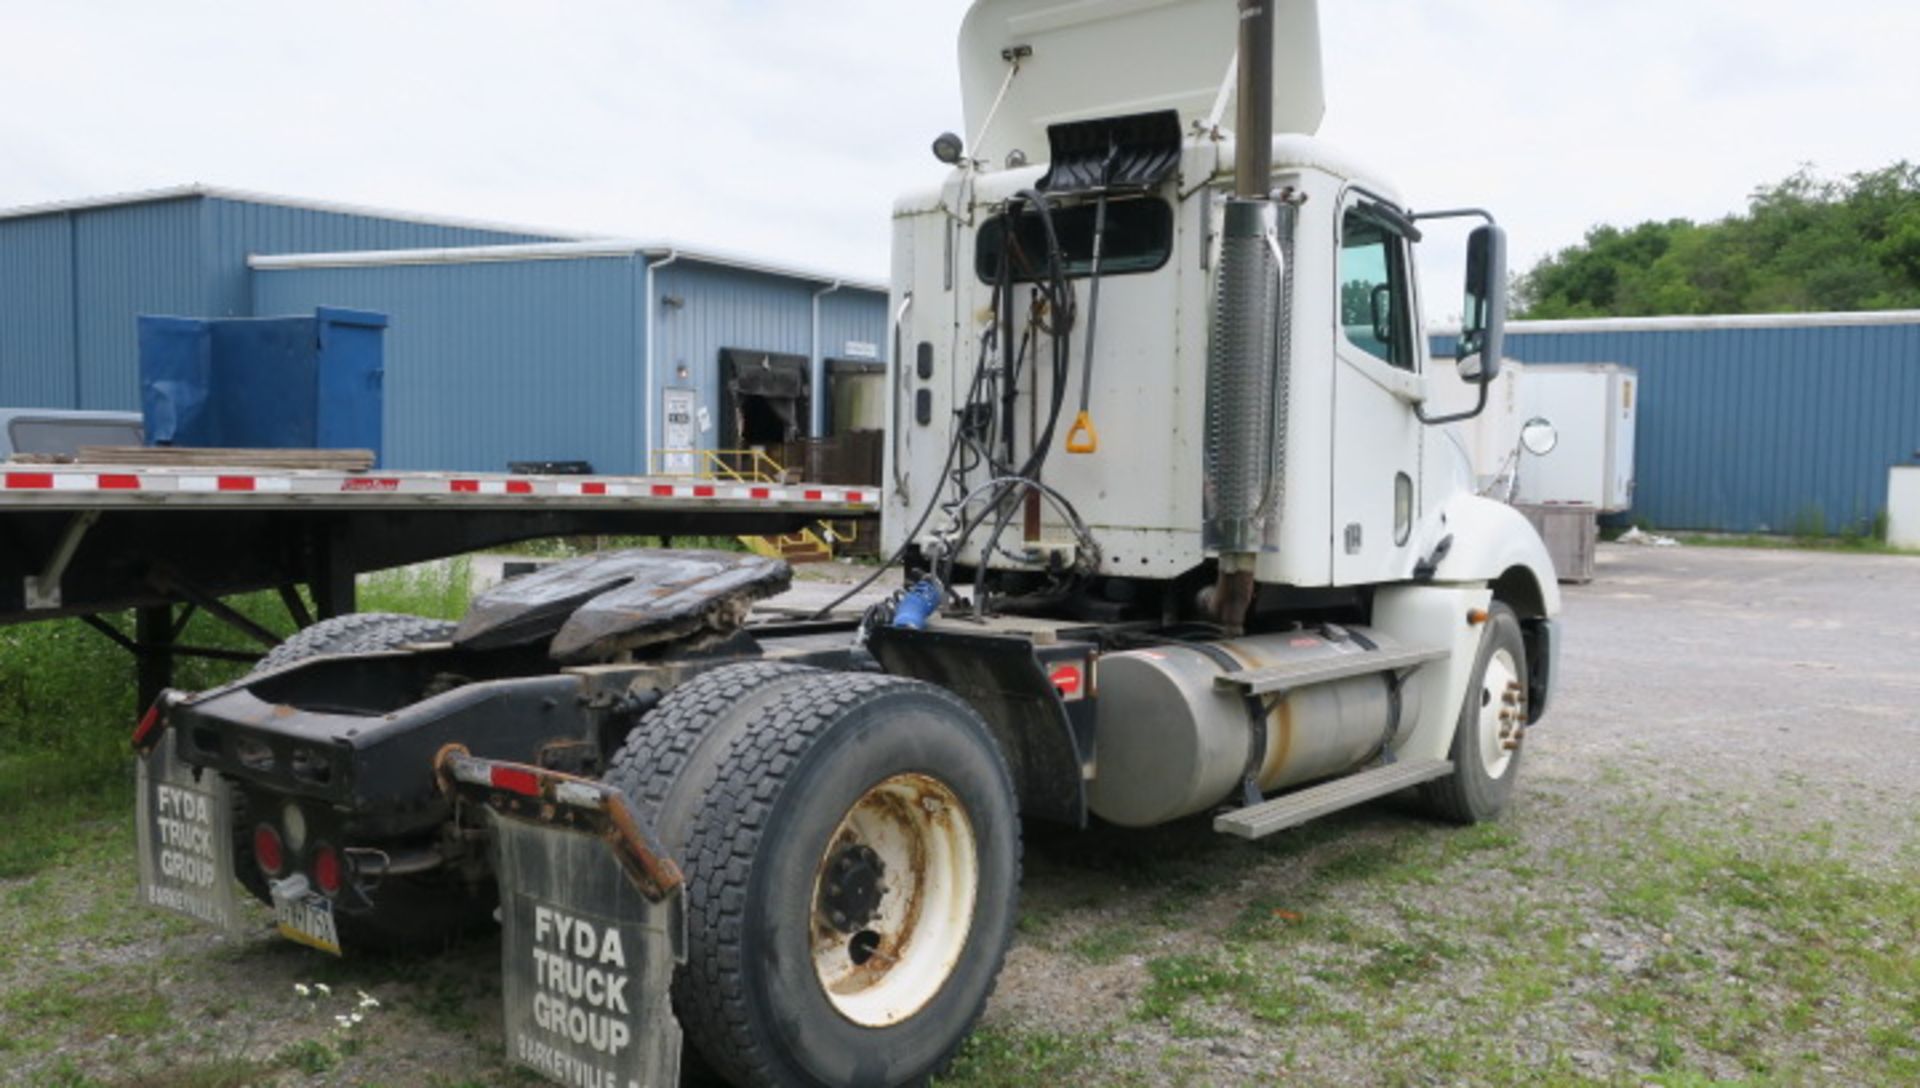 DAY CAB TRACTOR, 2005 FREIGHTLINER, Mdl. 6067HV6E, Fuller trans., Muncie PTO, Odo: approx. 600,000 - Image 2 of 6